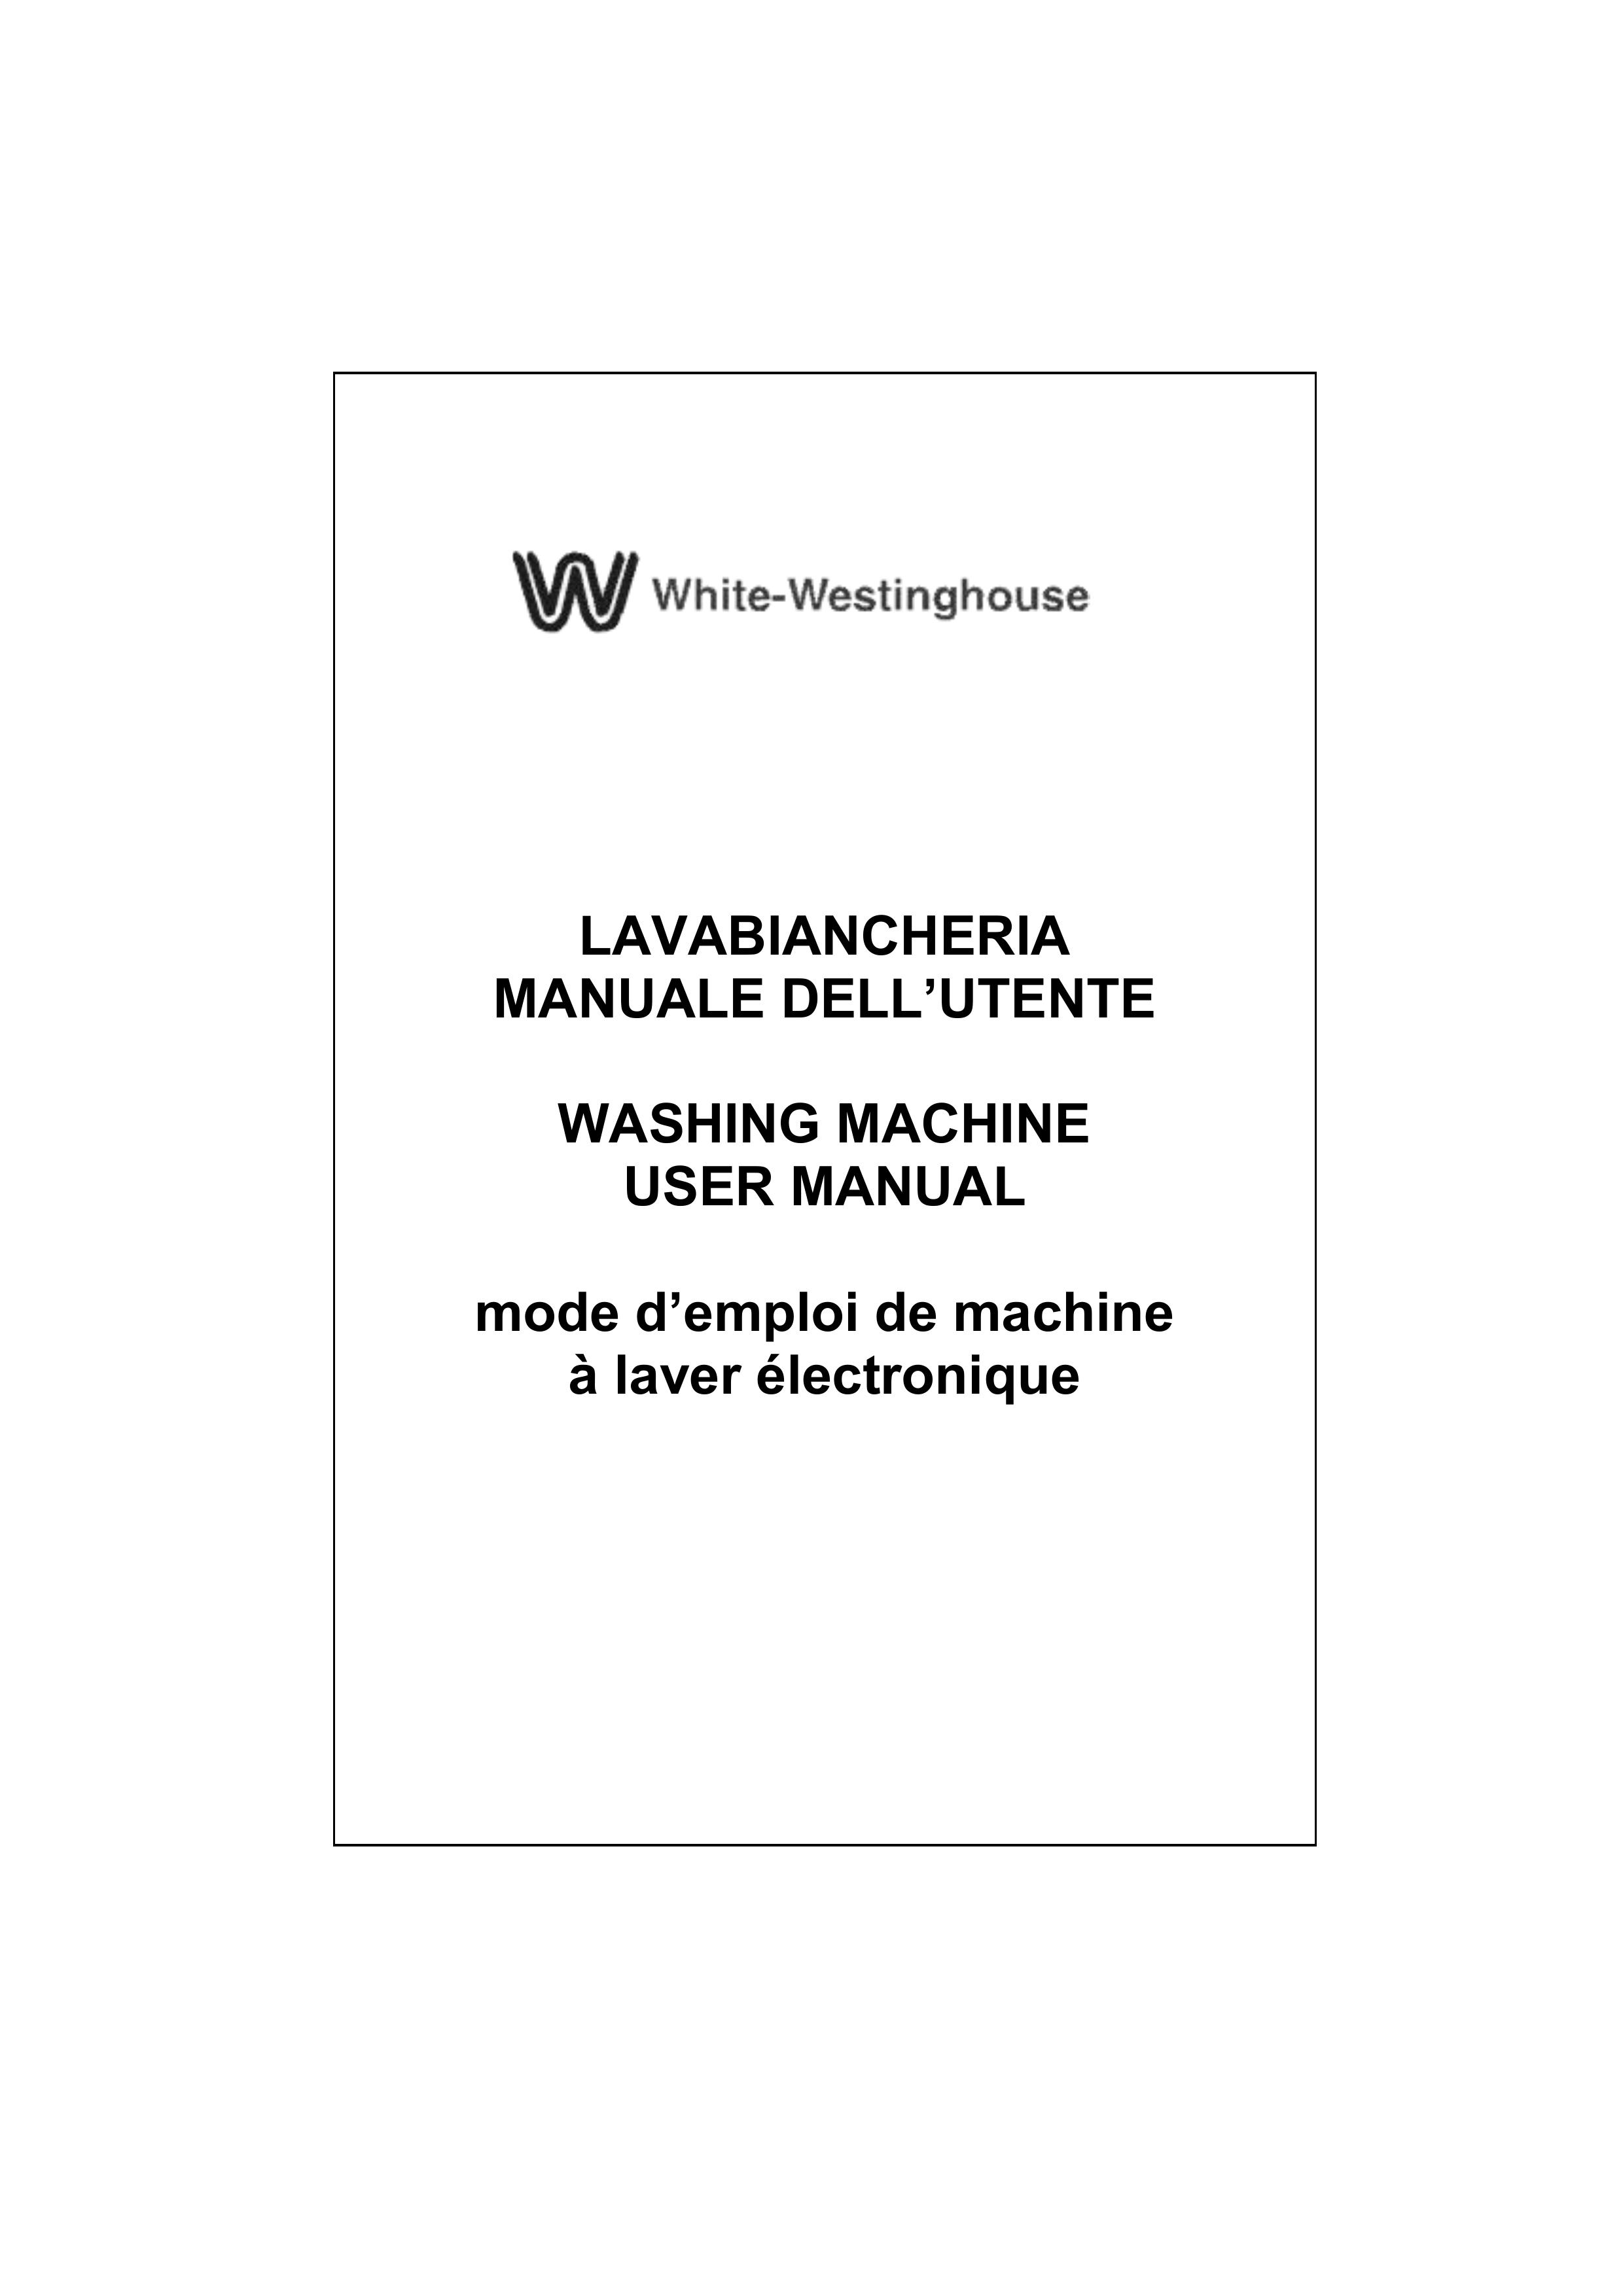 White-Westinghouse WM40T Washer User Manual